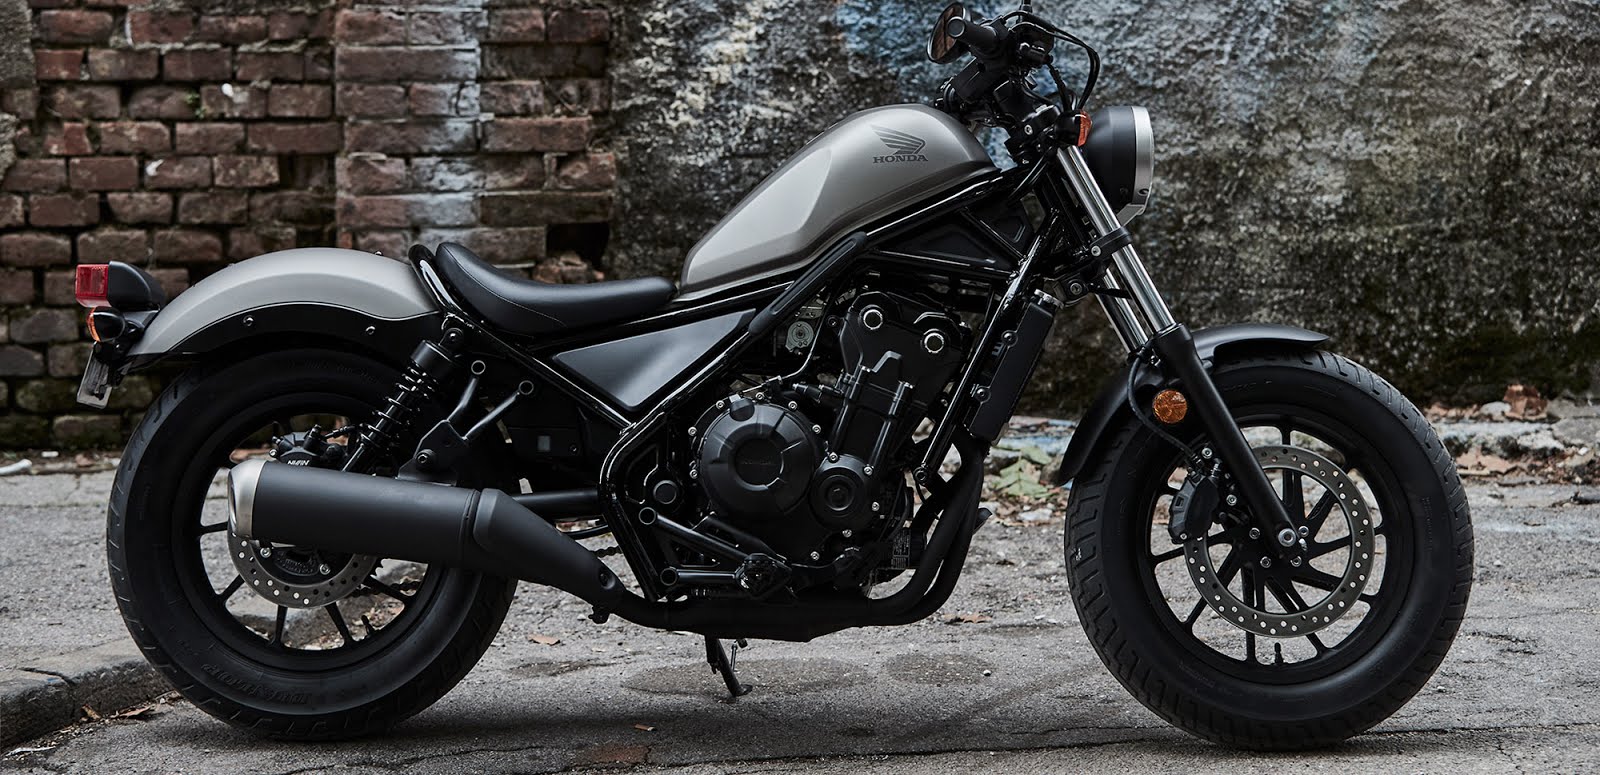 Honda Rebel 500 Price in India, Launch Date, Mileage, Specifications ...